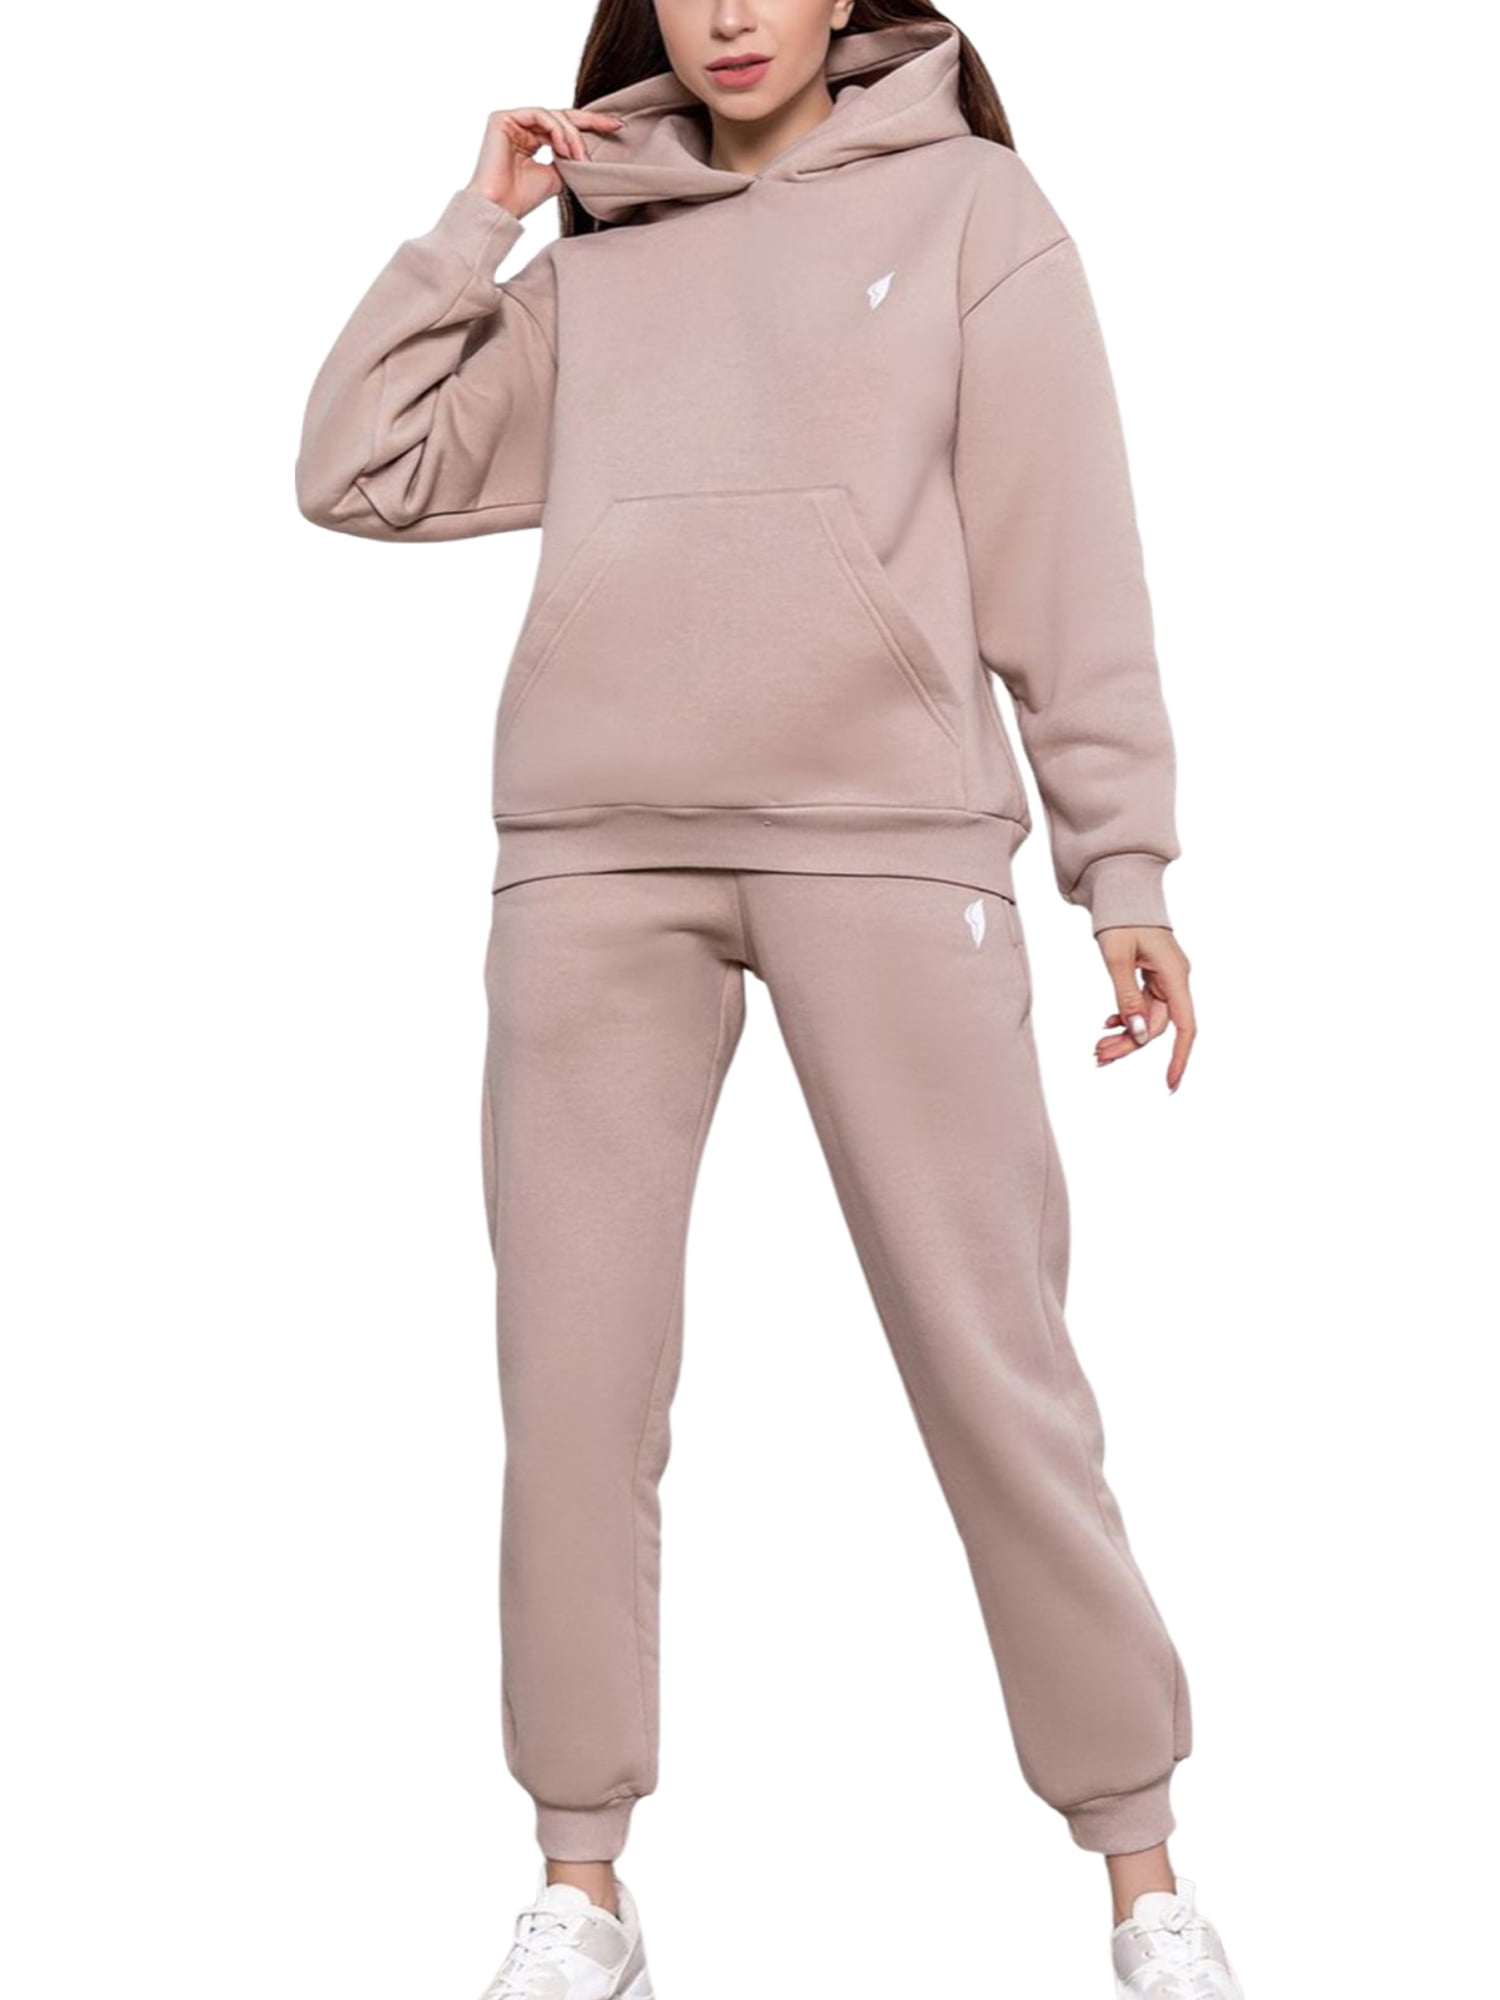 FOCUSNORM Two Piece Outfit For Women Long Sleeve Pullover With Hooded Long  Pants Tracksuit Jogger Set with Pockets 